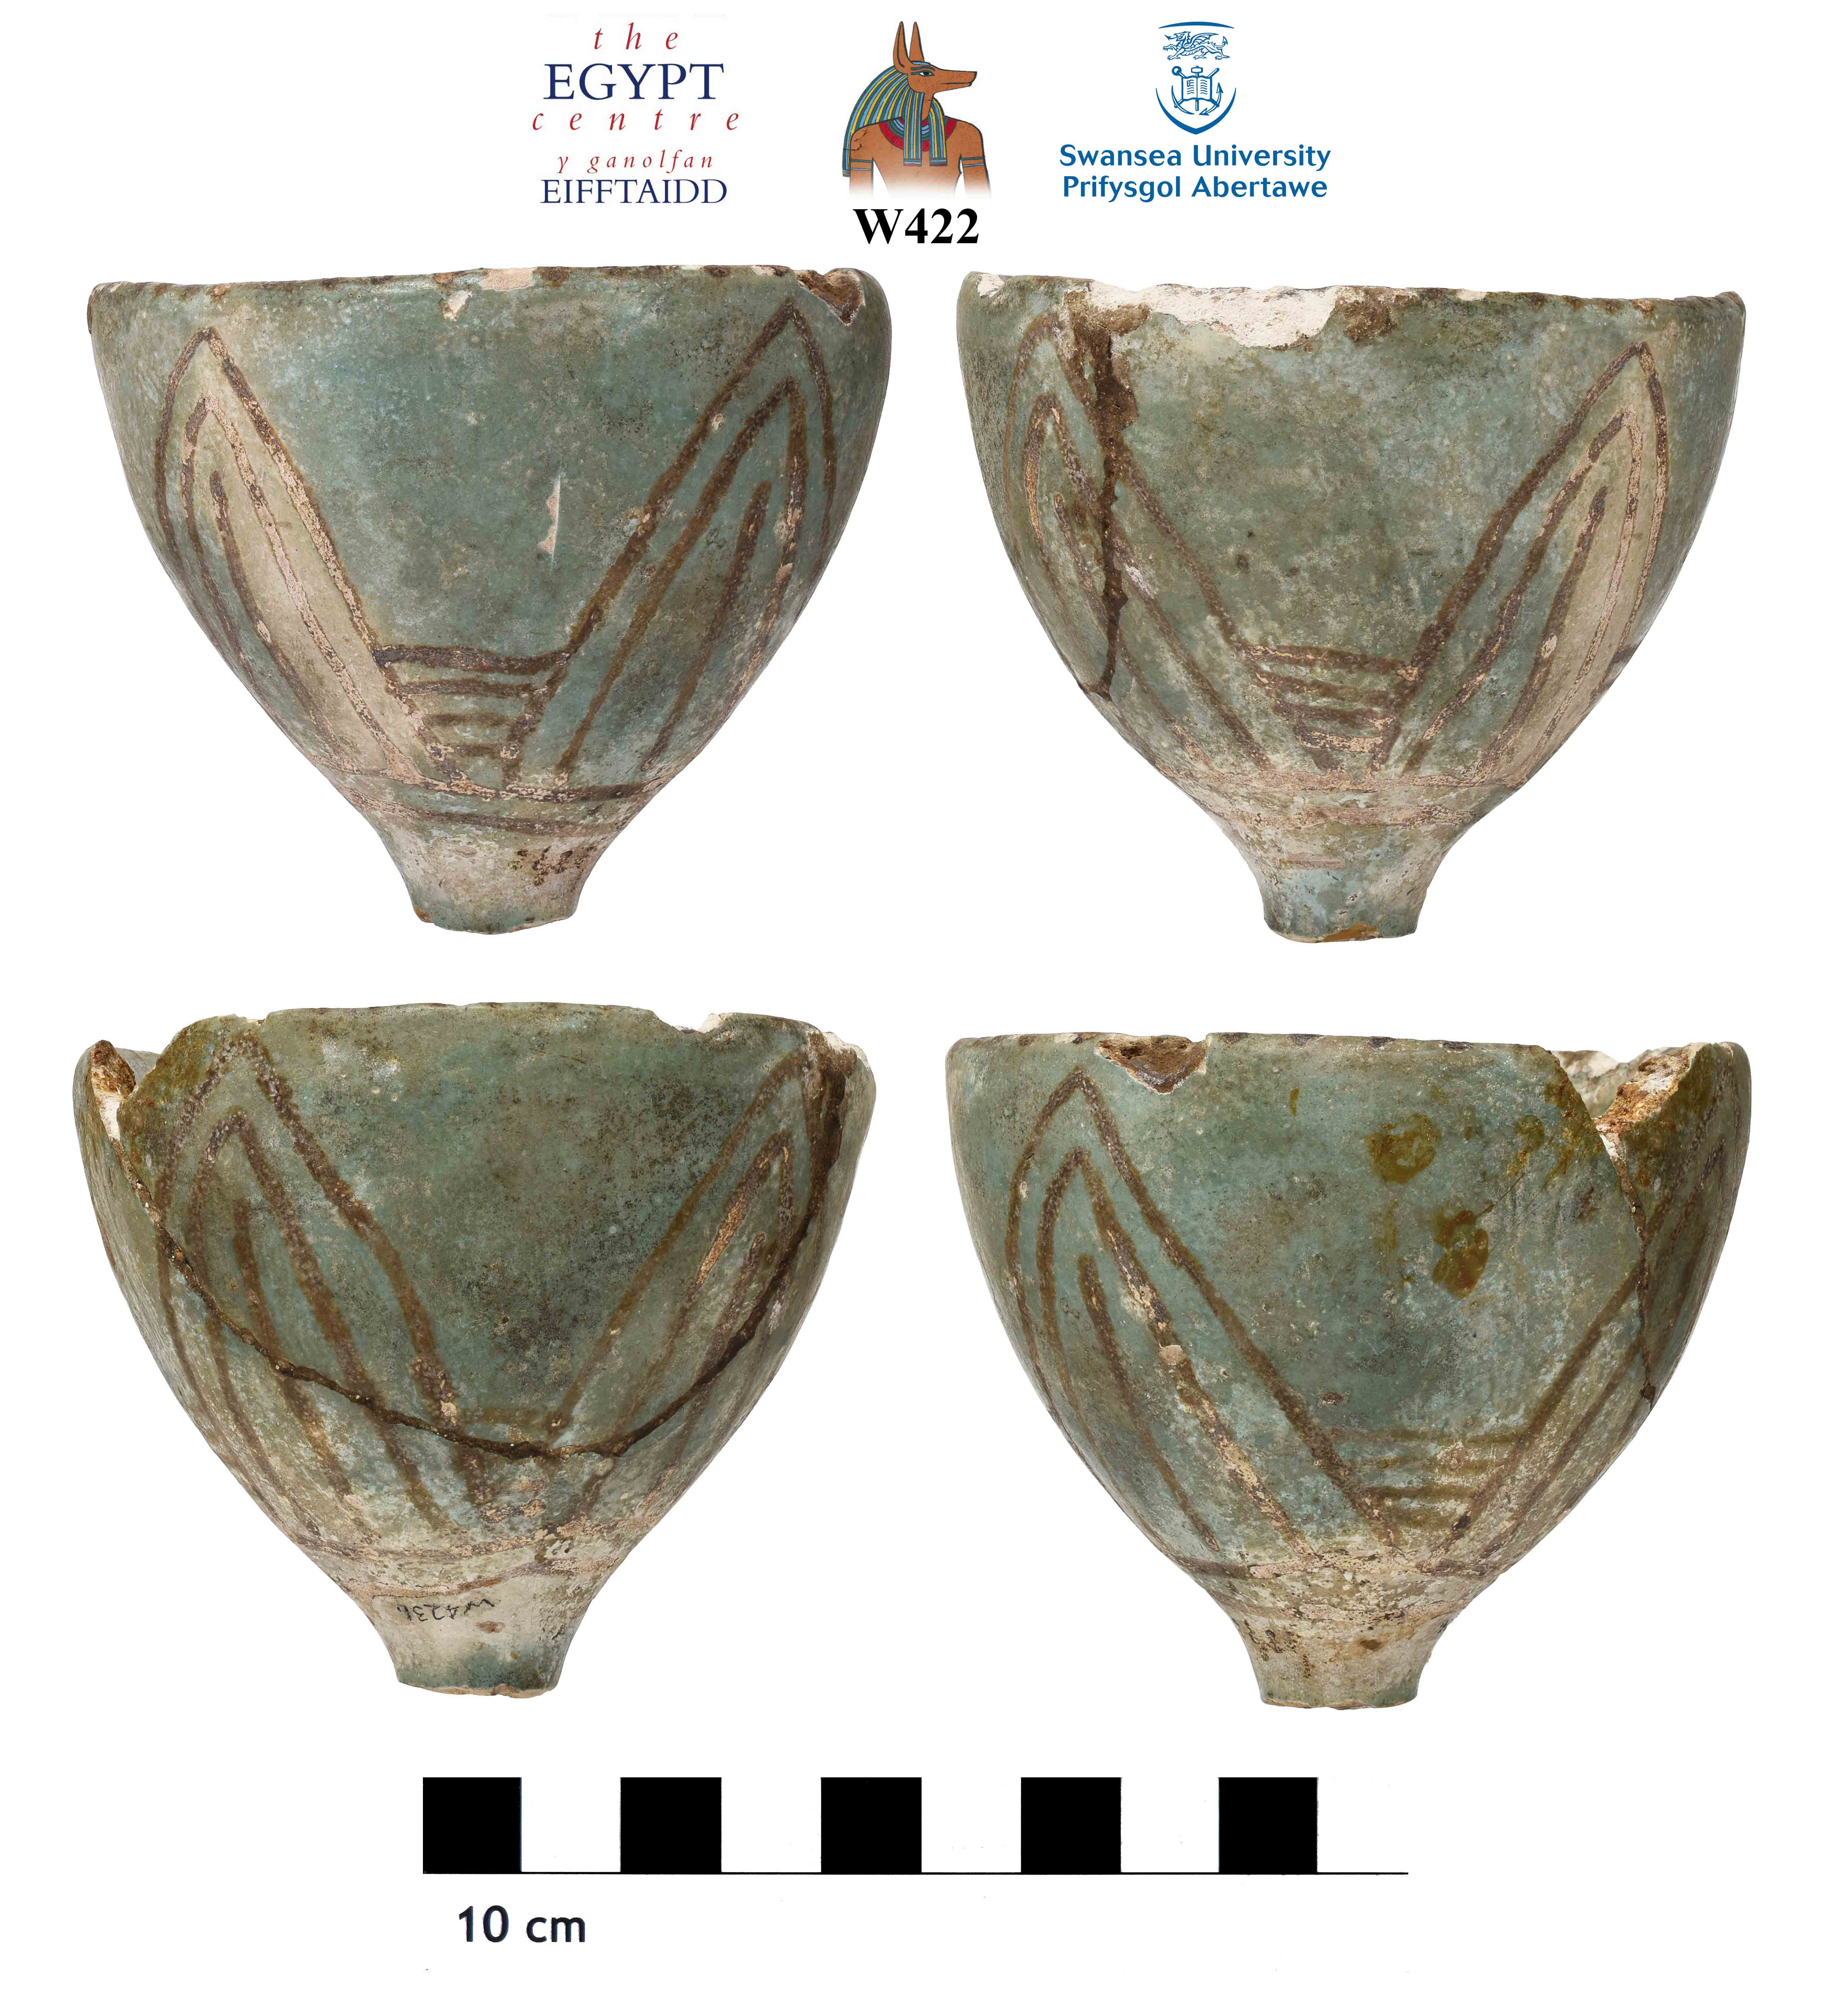 Image for: Faience cup